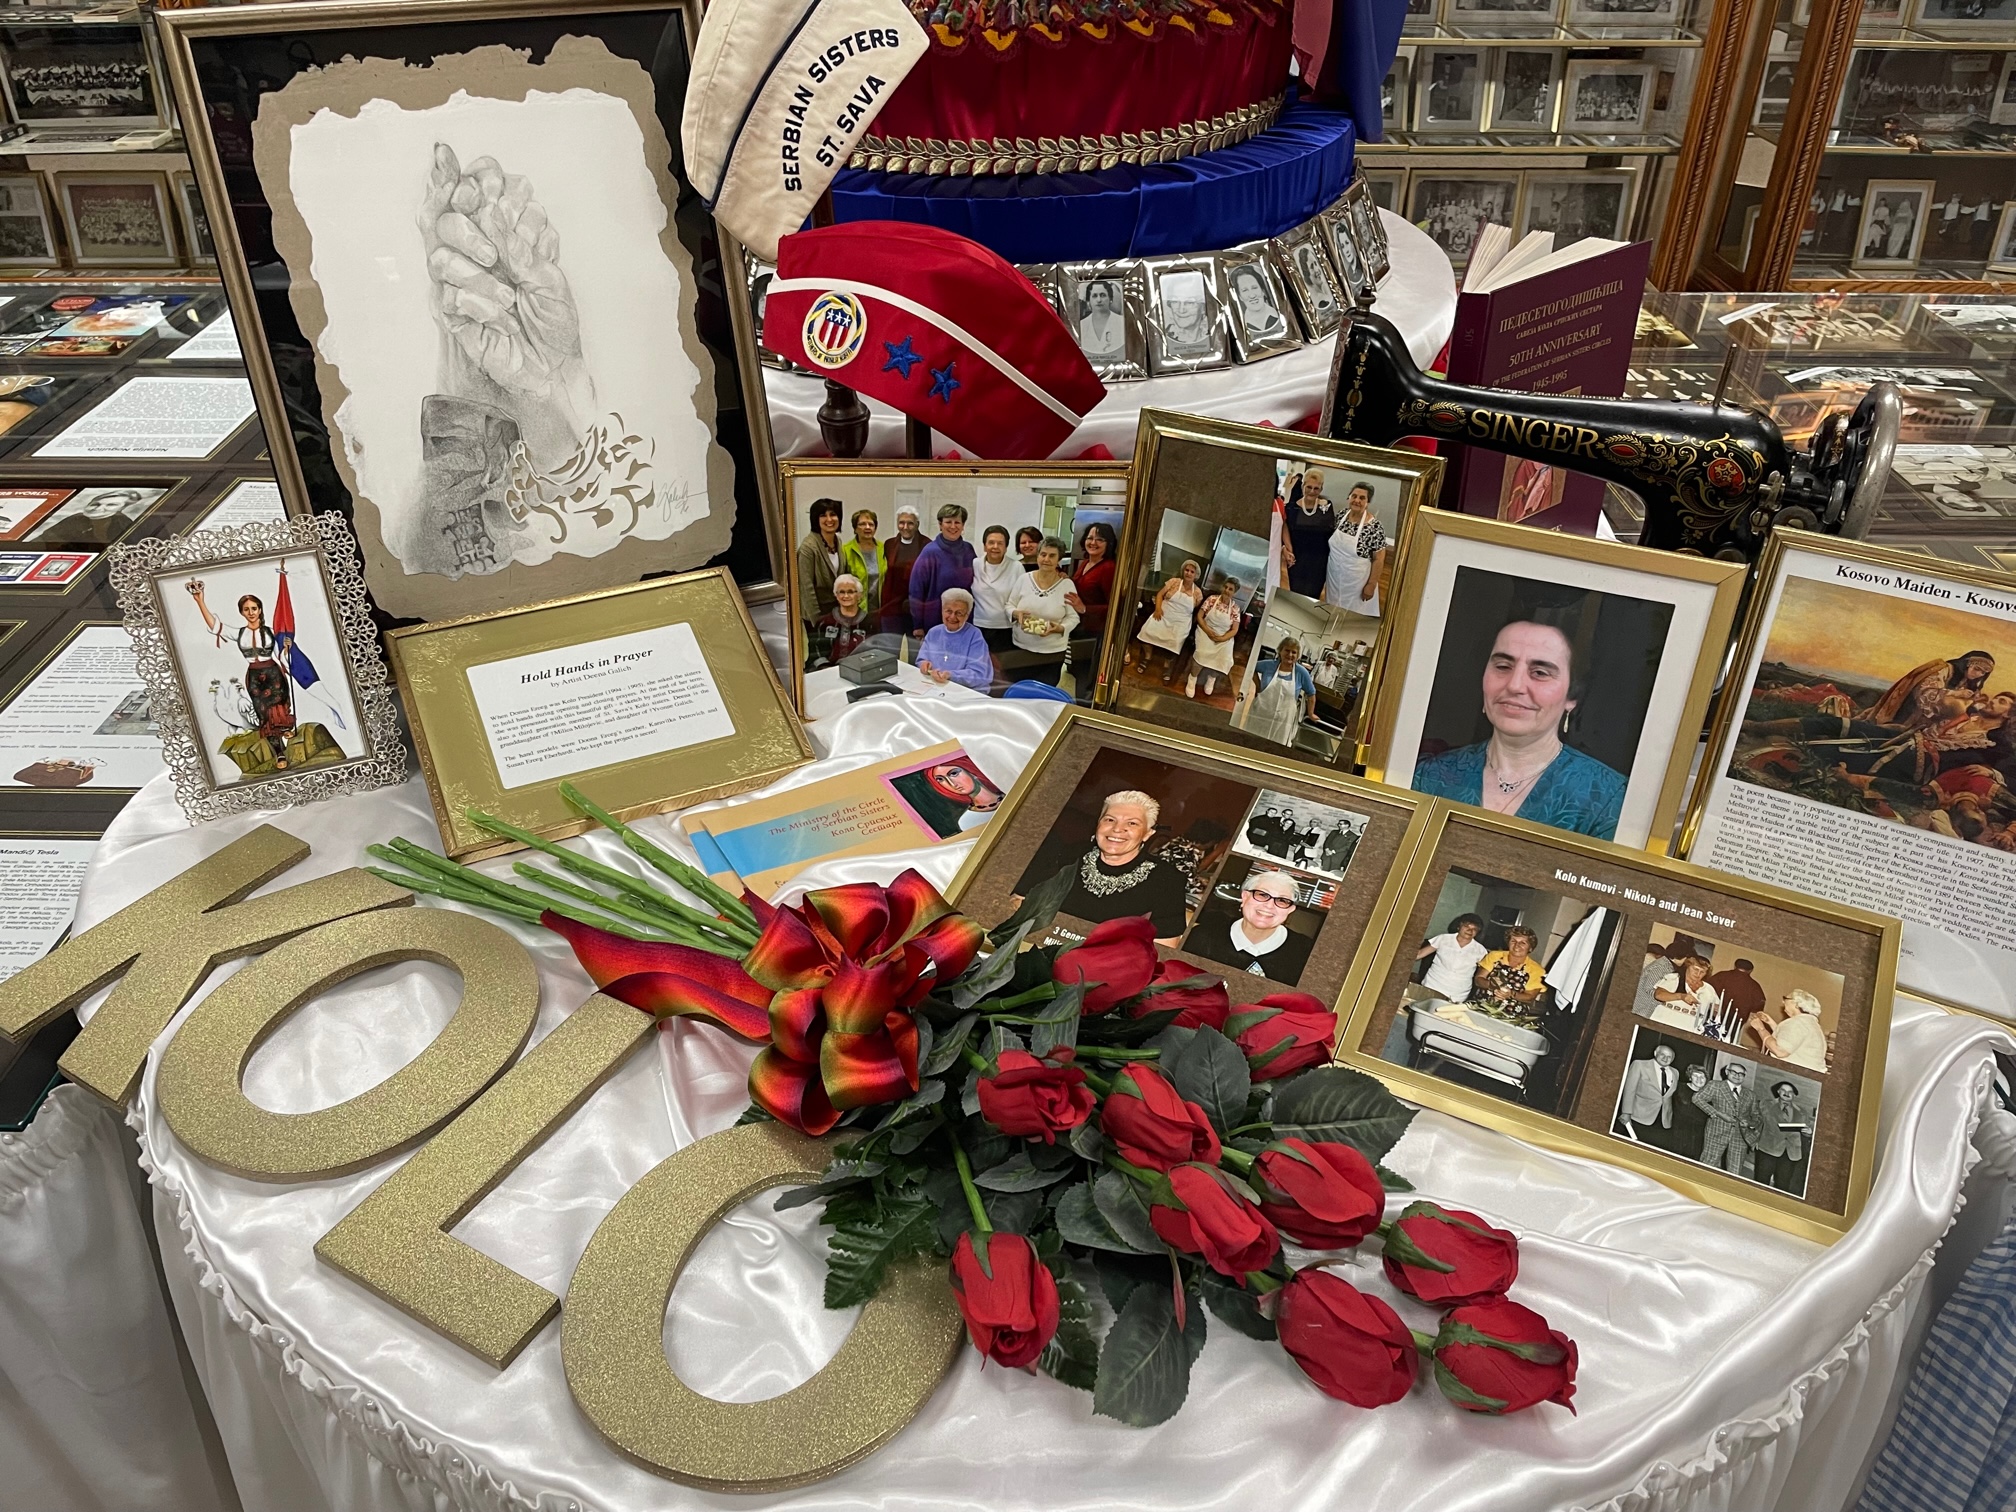 Last chance to view the “Celebrating Serbian Women” exhibit at St. Sava Merrillville – Sunday, May 21